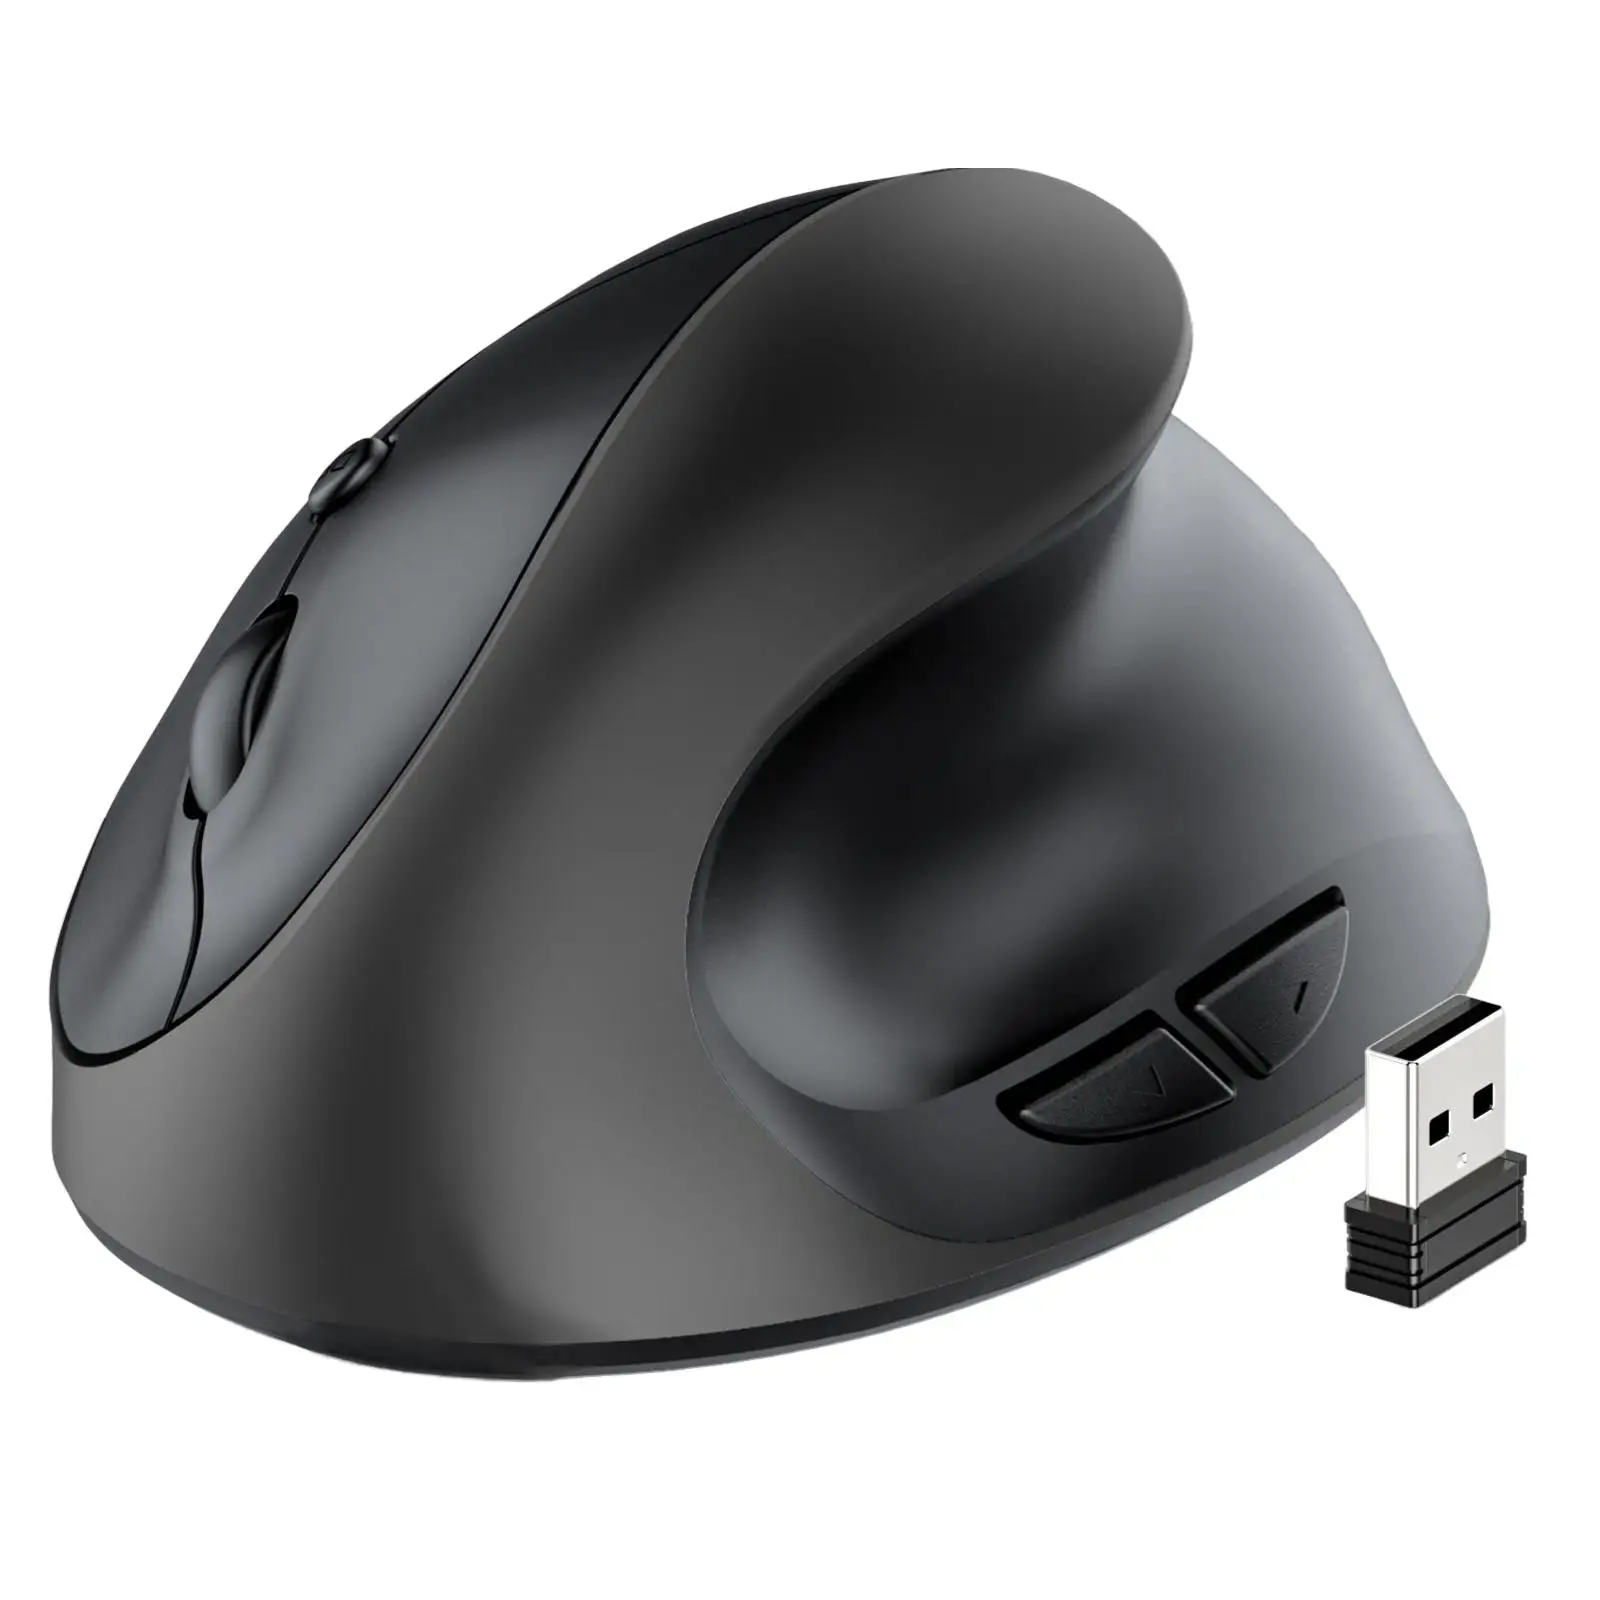 Vertical Mouse Ergonomic Gaming Mouse Computer Mouse with Receiver 1600 DPI for PC